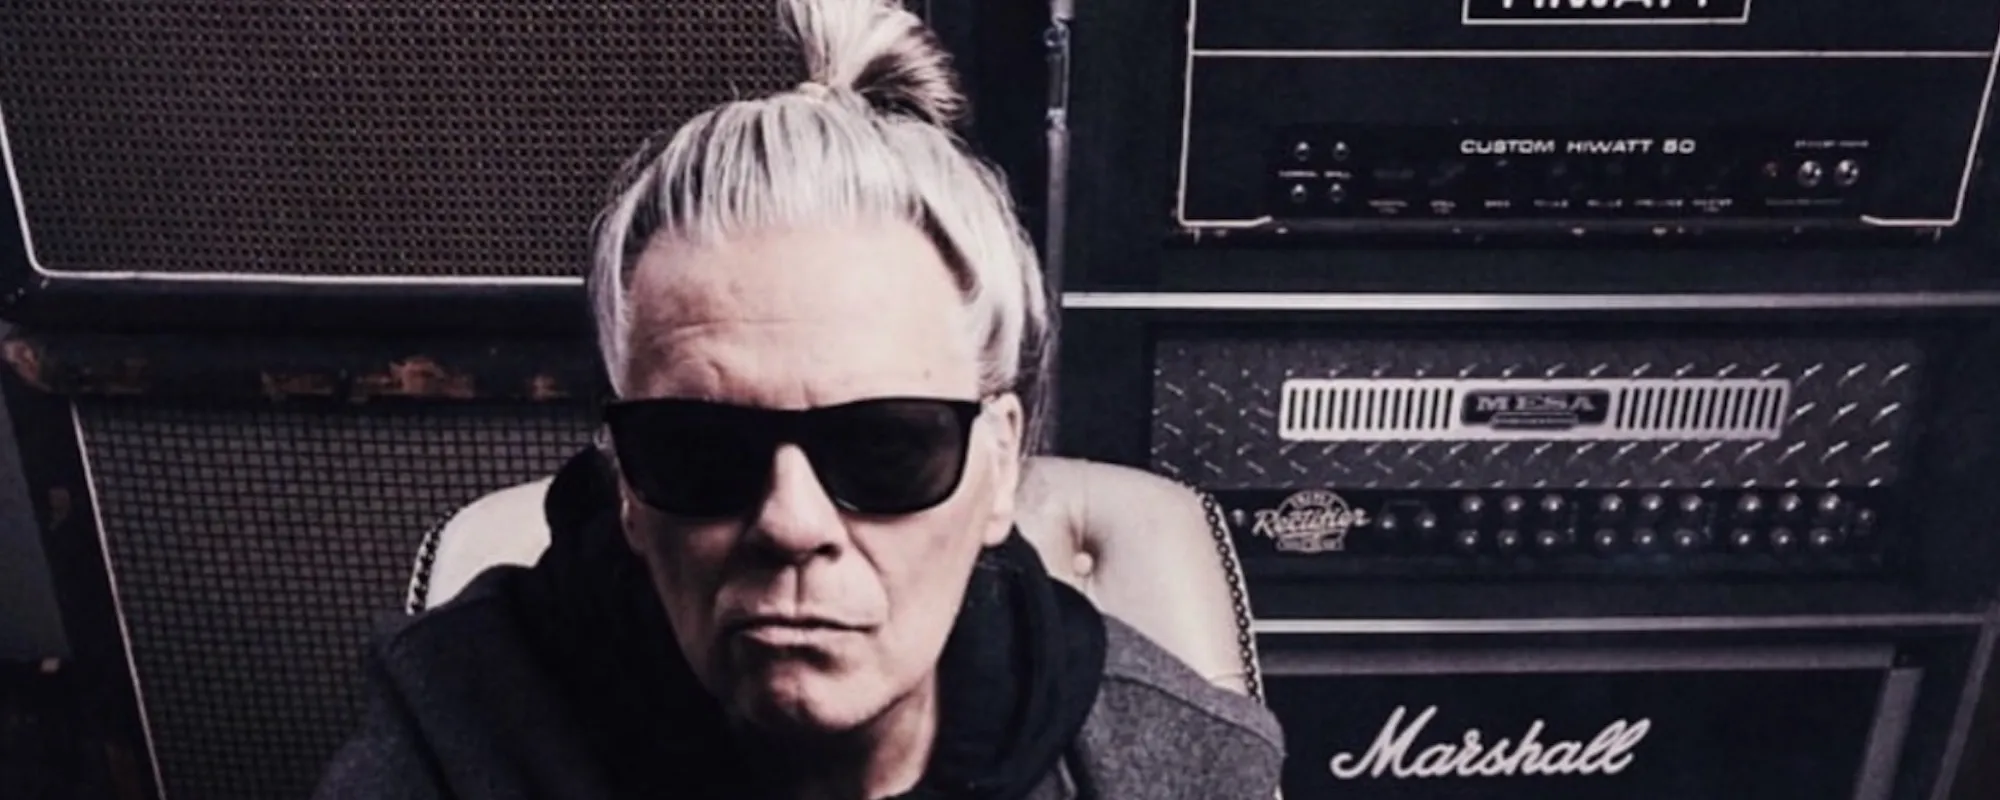 Former Duran Duran Guitarist Andy Taylor to Release First Solo Album in 33 Years